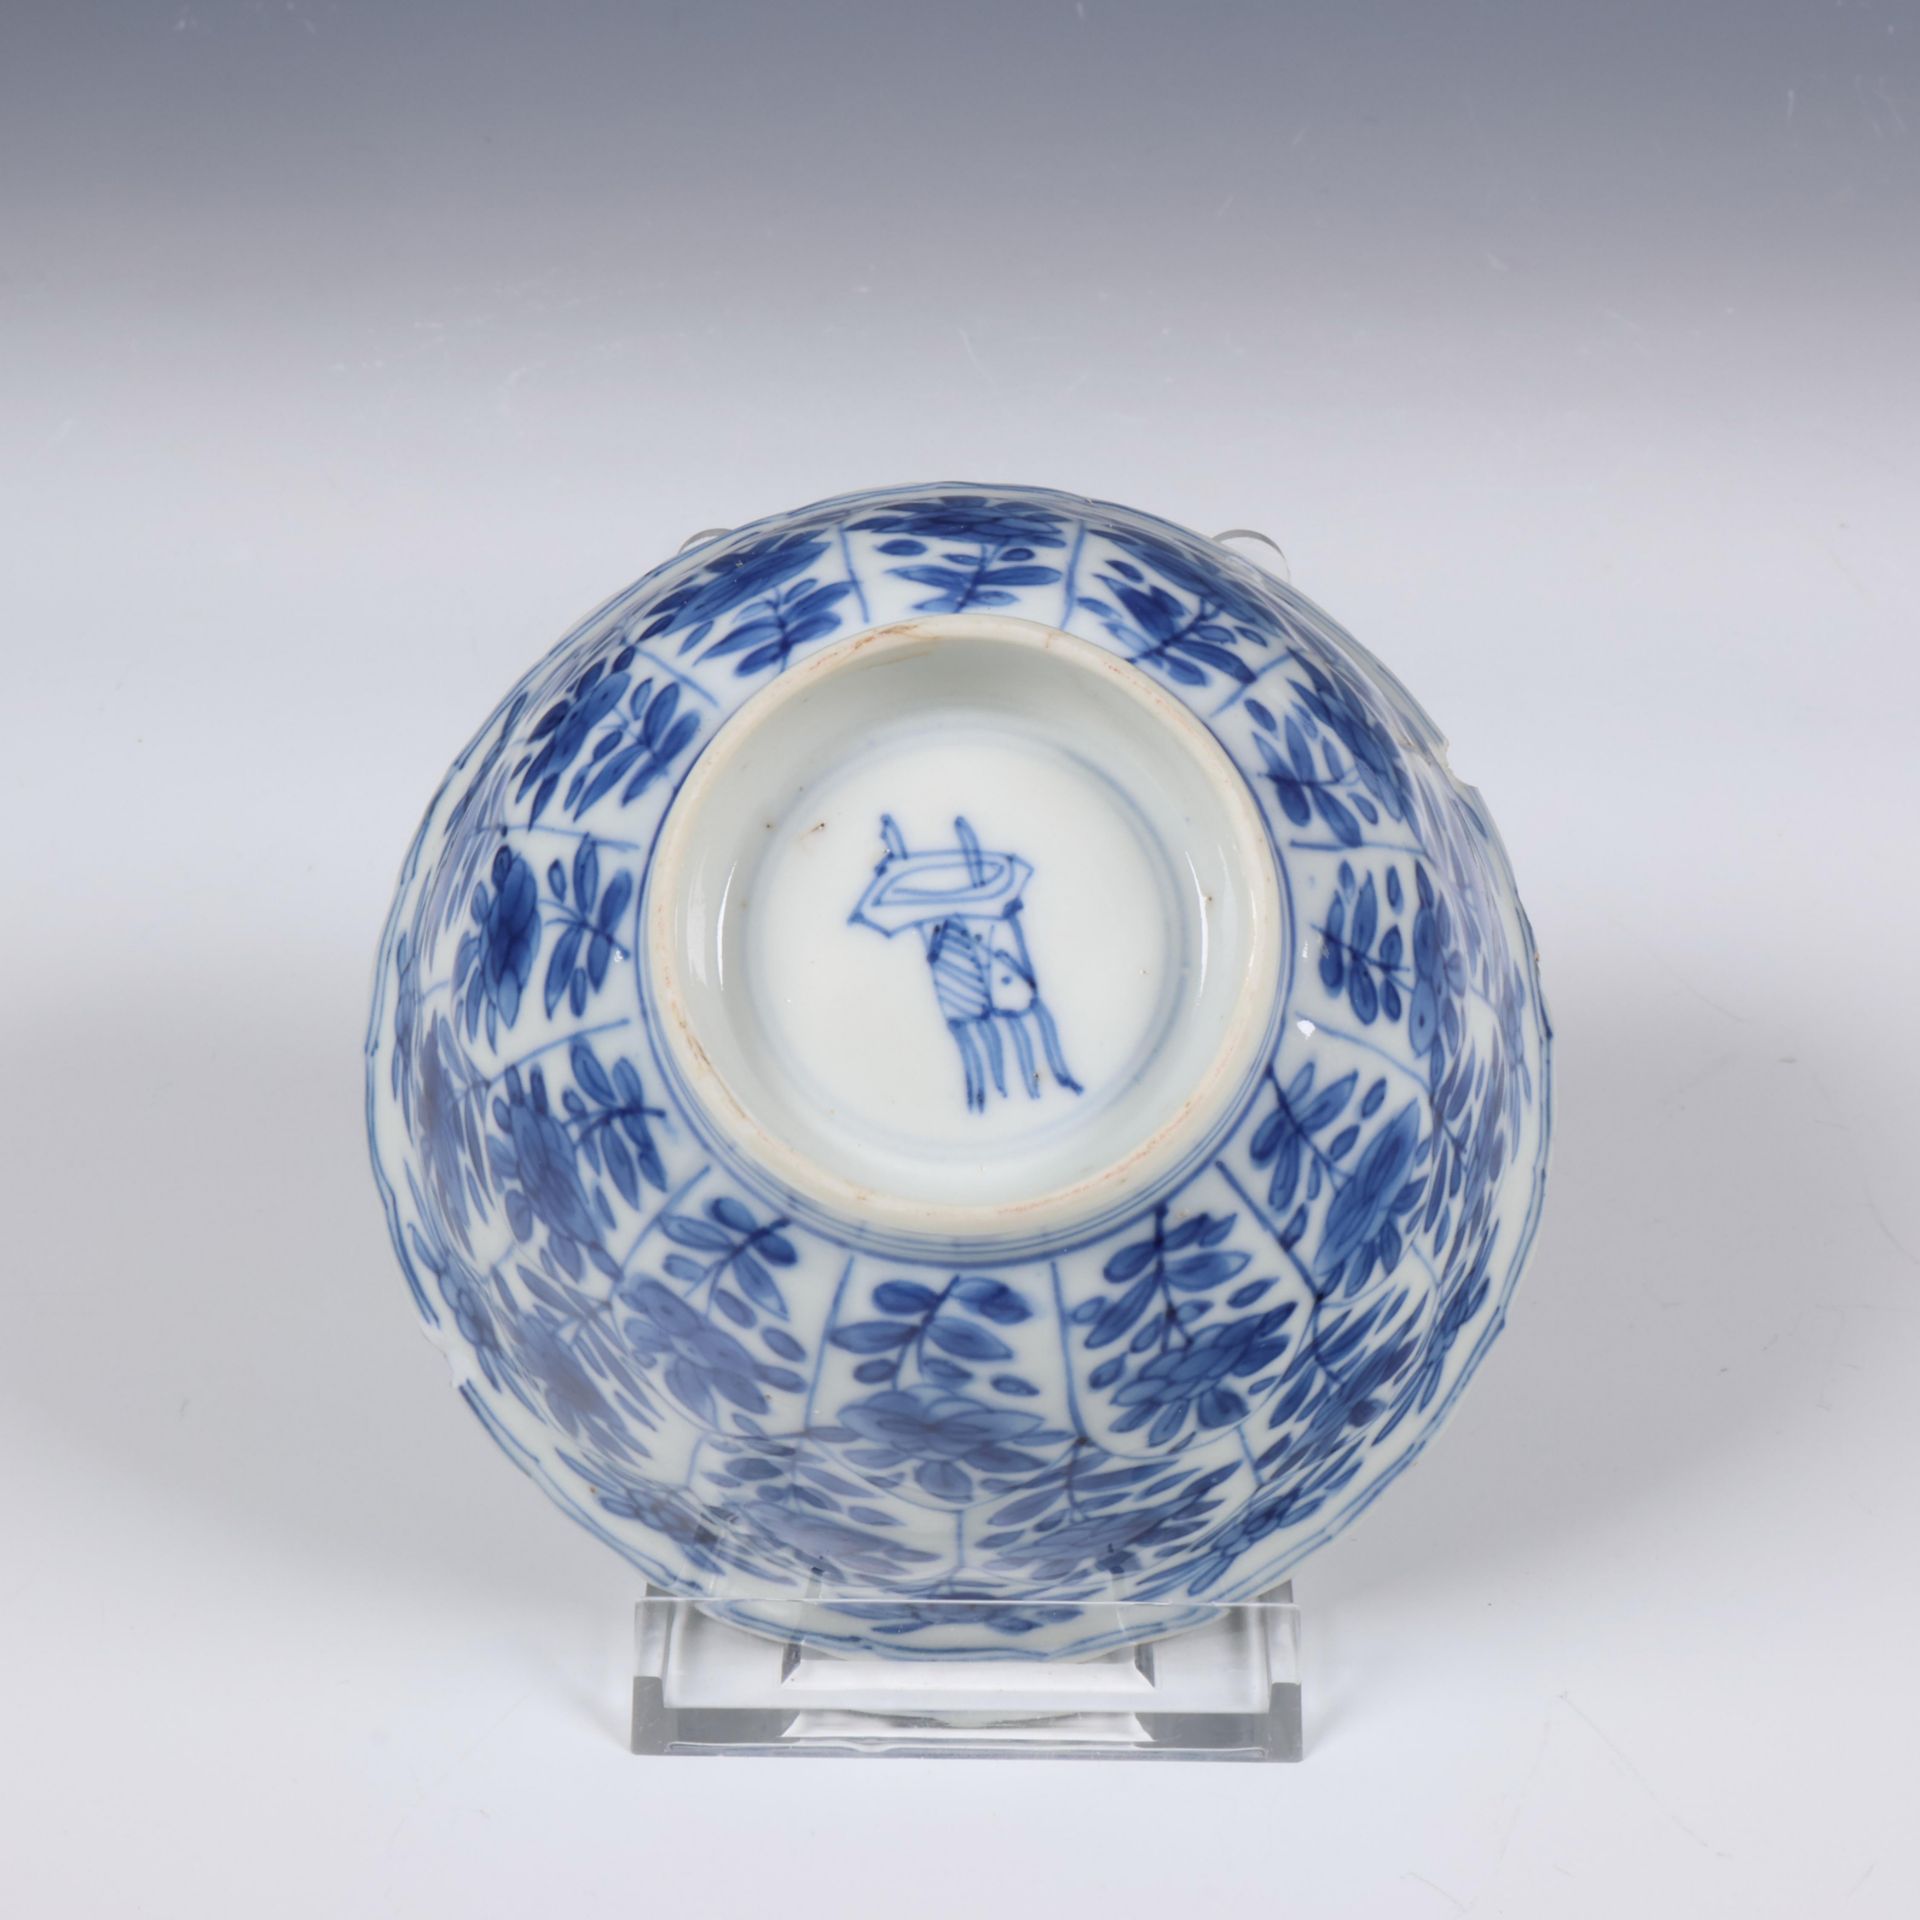 China, blue and white porcelain floral bowl, Kangxi period (1662-1722), - Image 4 of 5